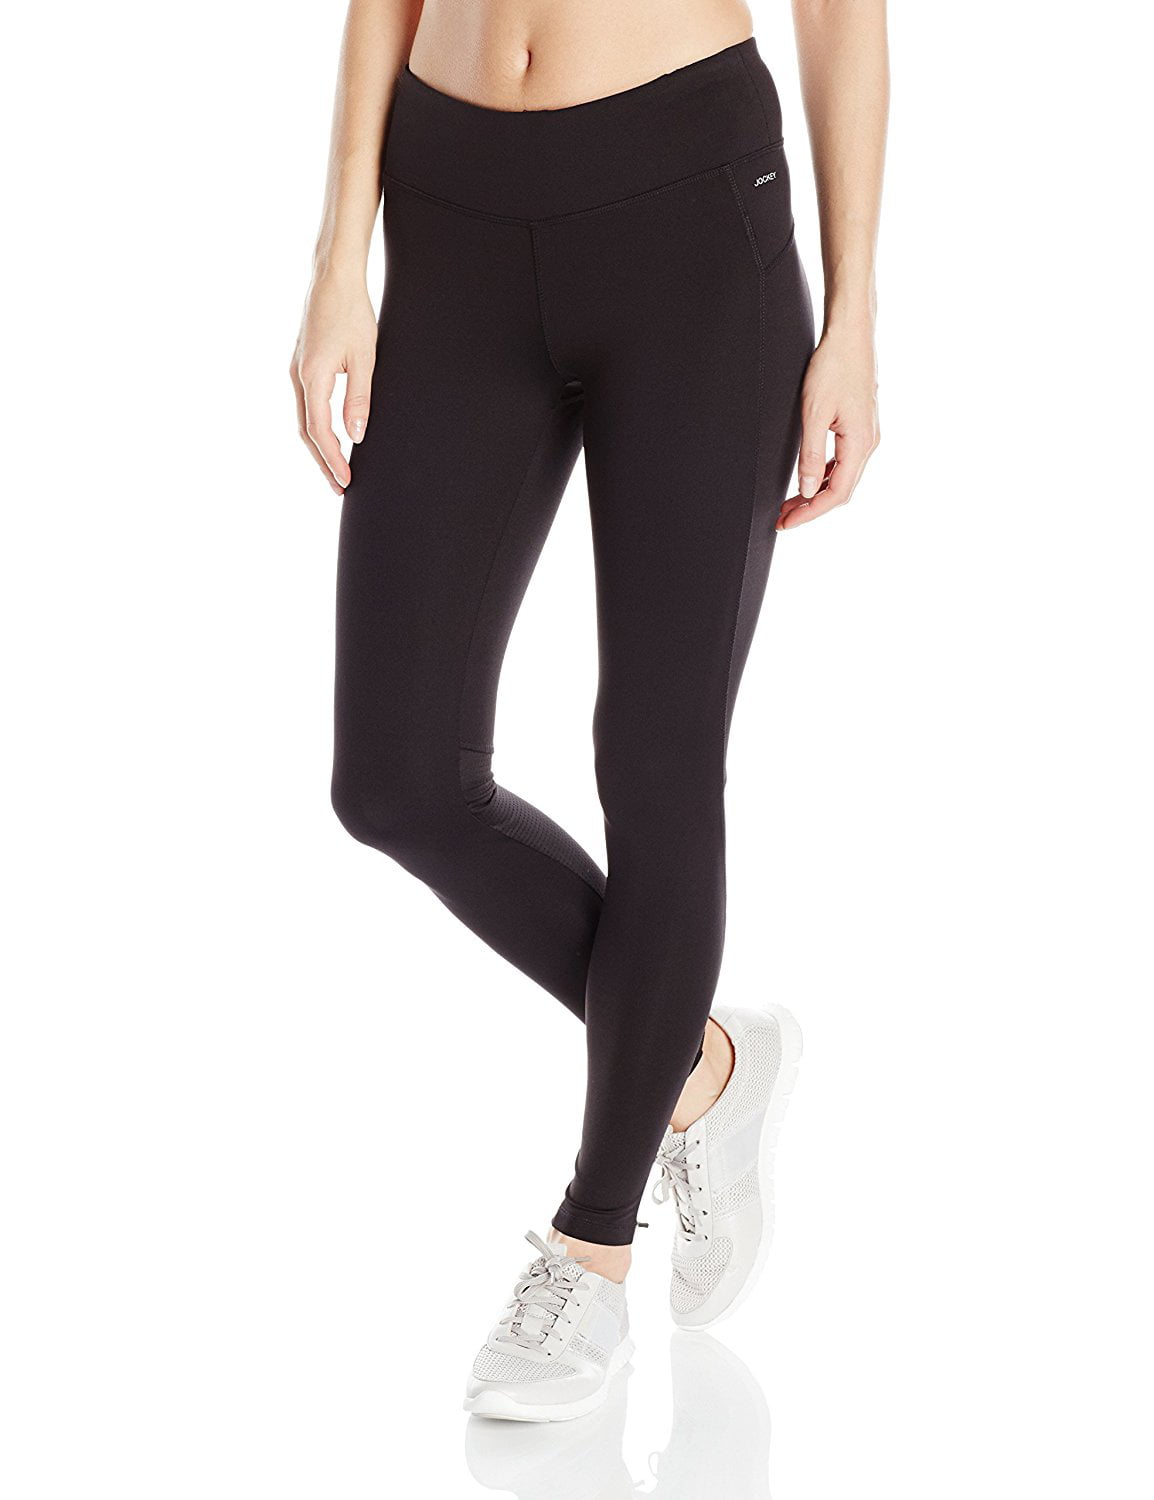 5 Amazingly Affordable Leggings on Sale at Walmart